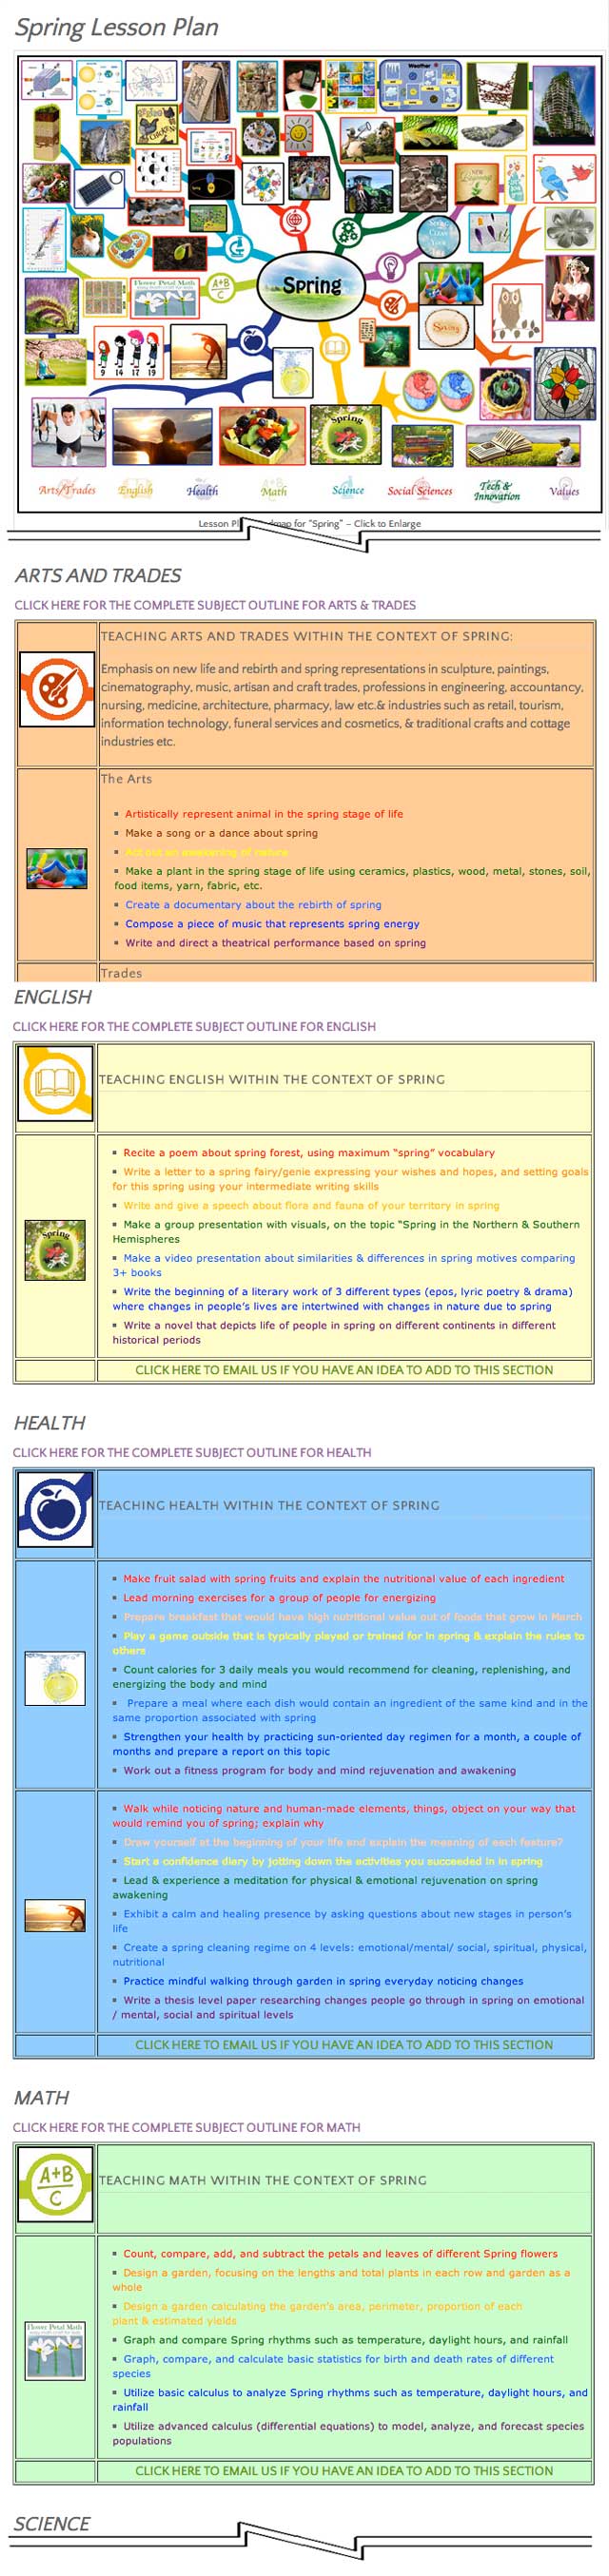 Spring lesson plan page, One Community